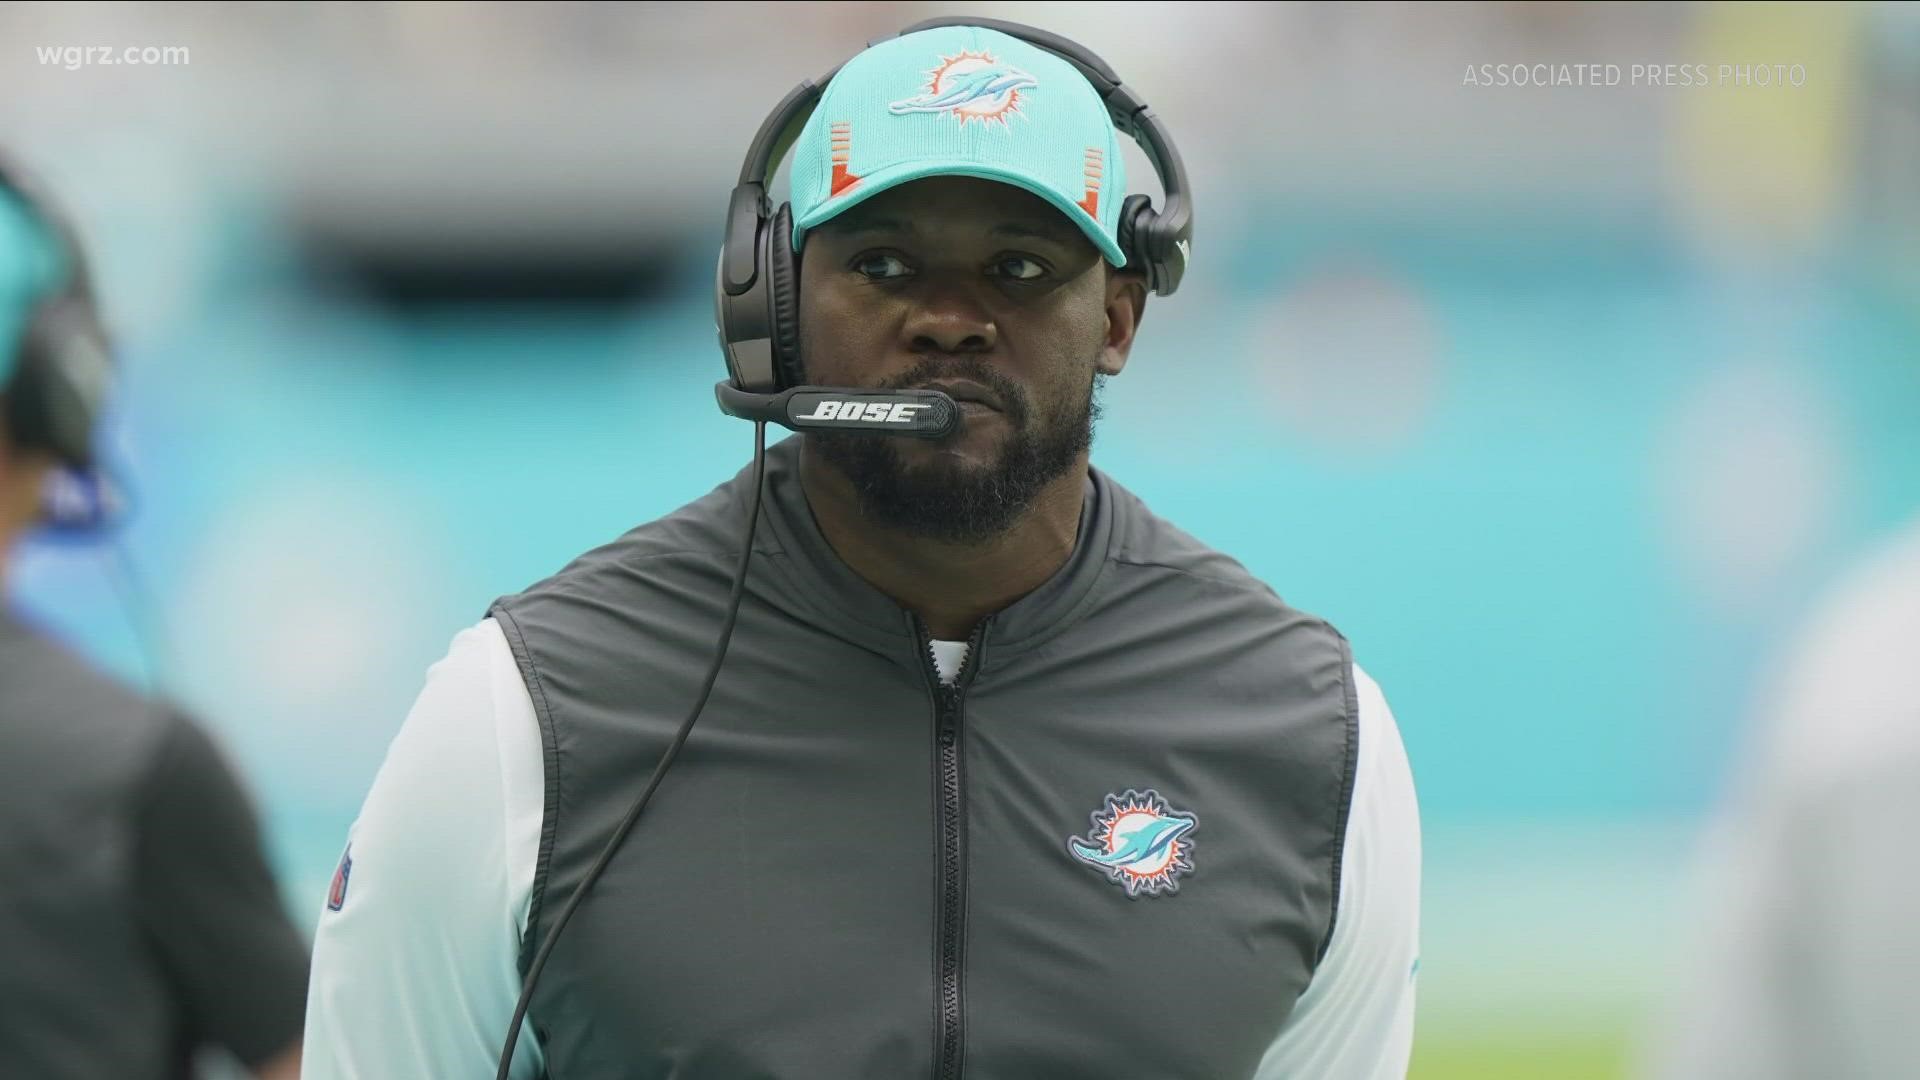 Former Miami coach Brian Flores suing the league and the Giants, Broncos and Dolphins. He claims racial discrimination in his firing by those three teams.